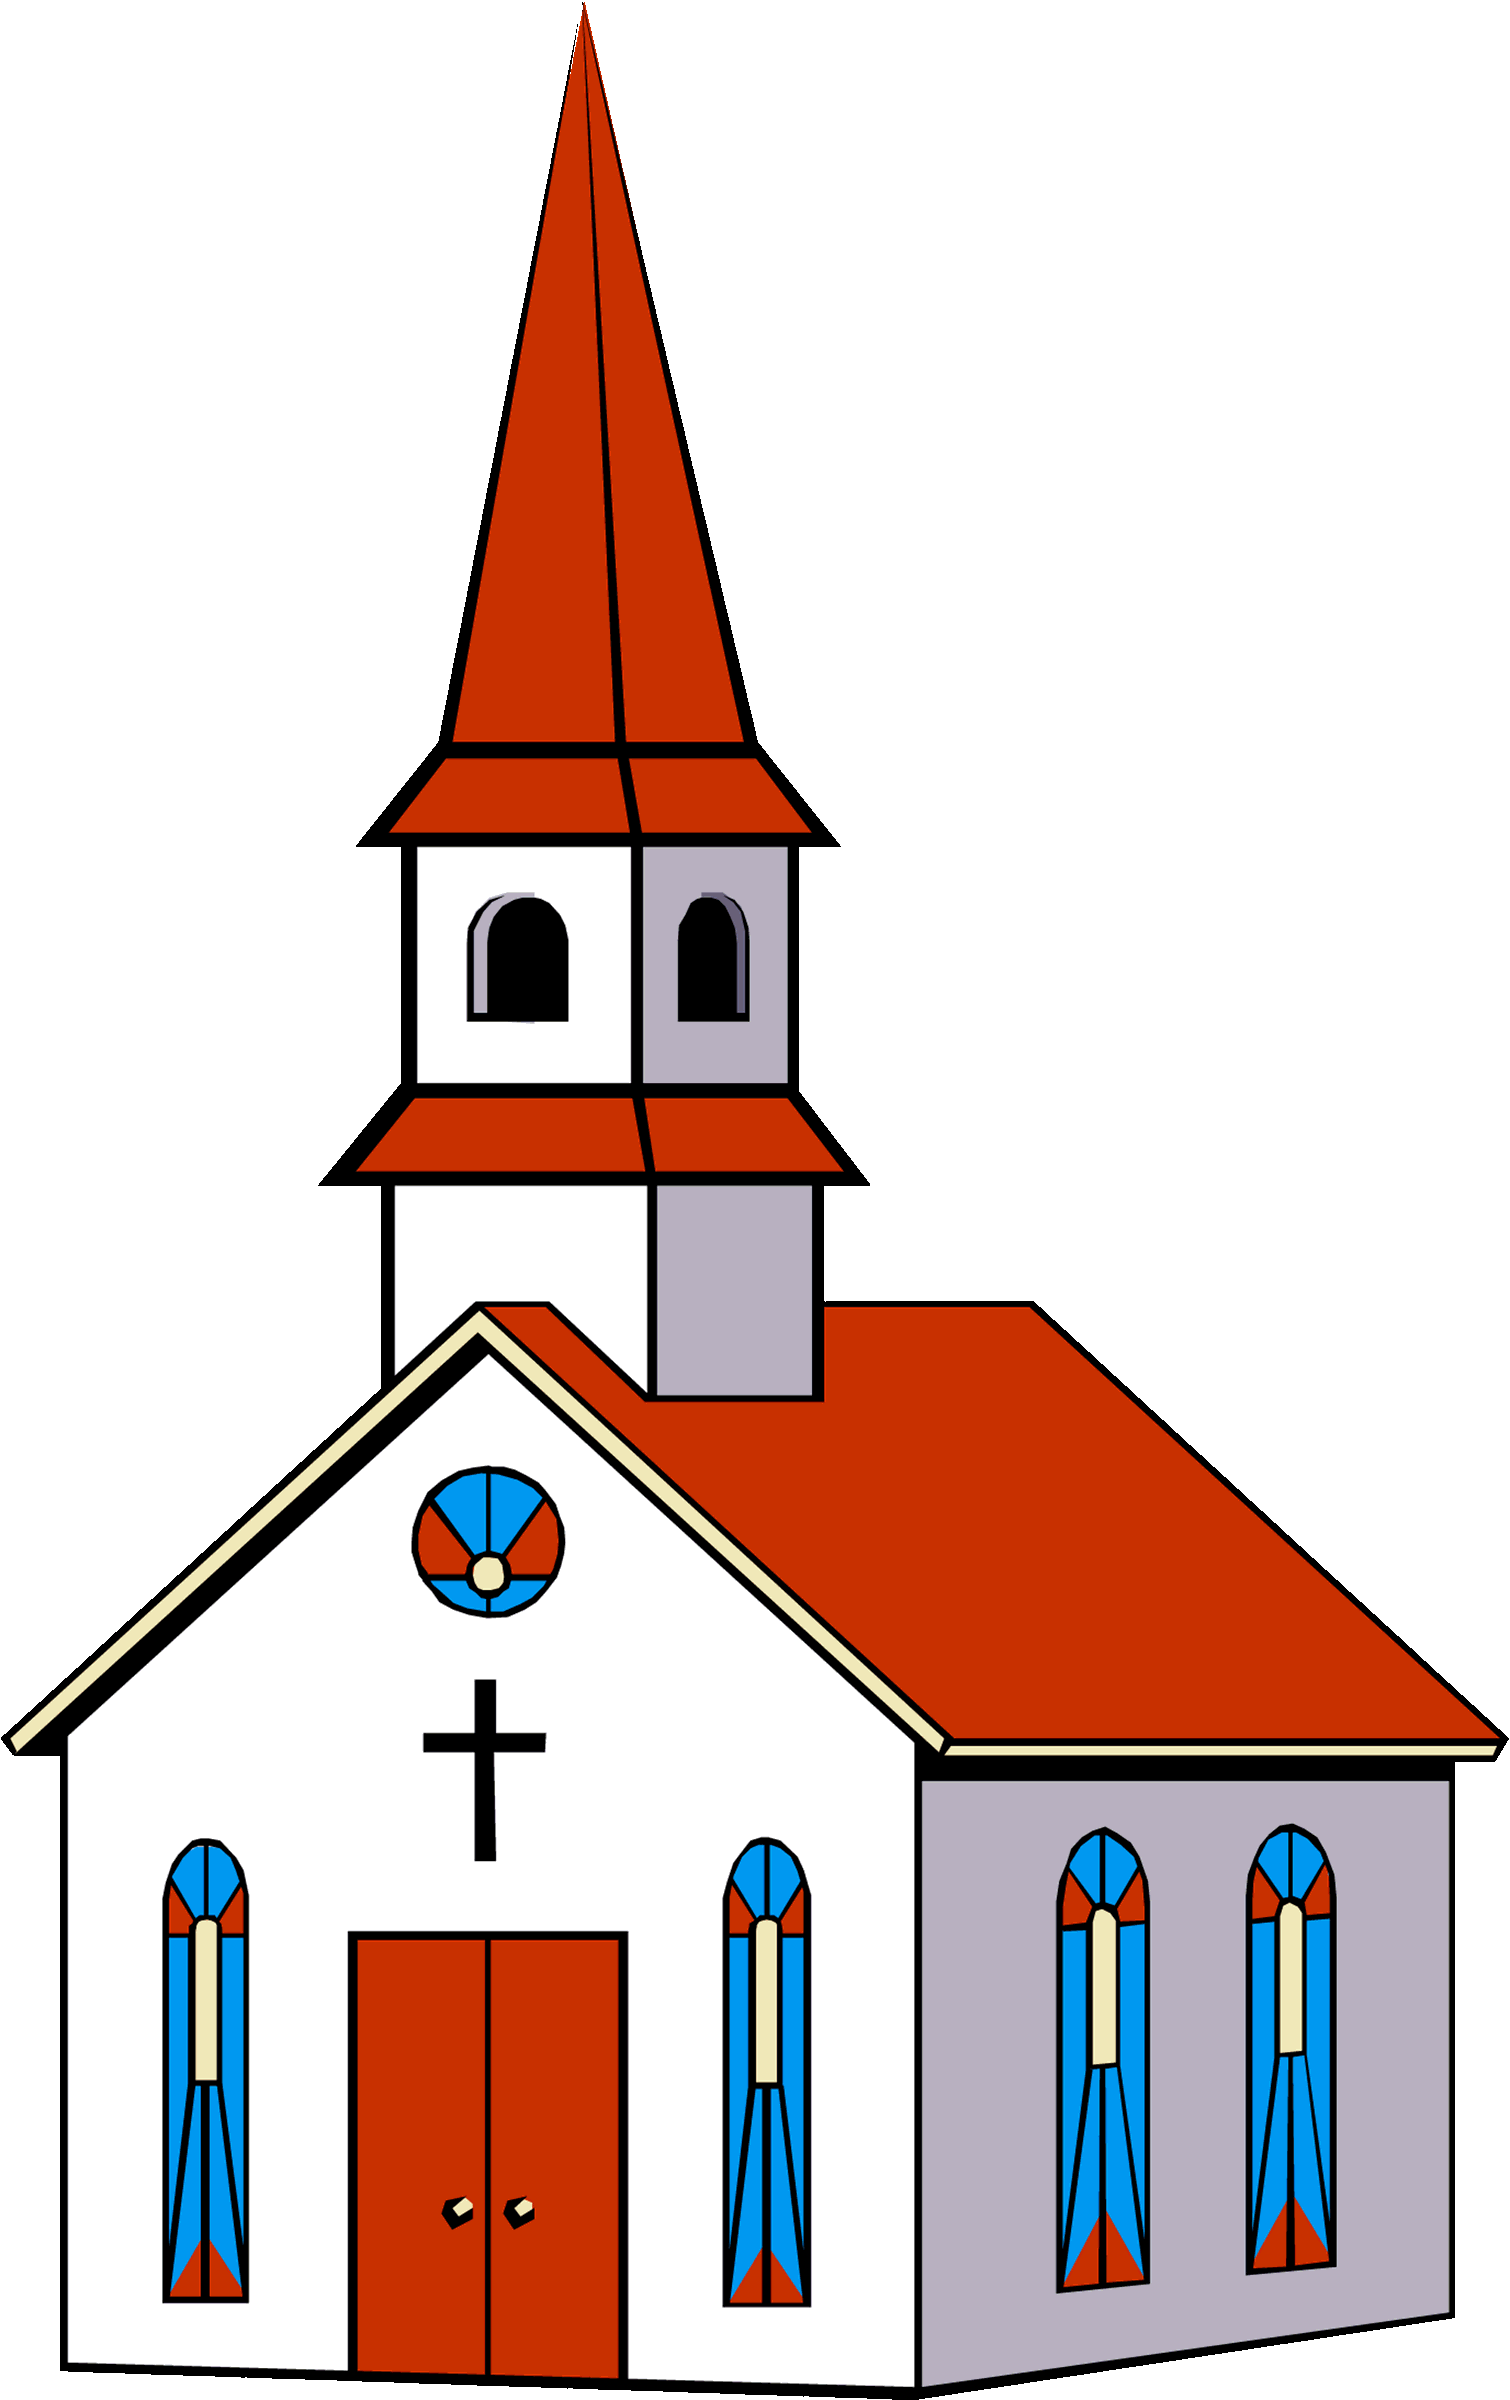 Funeral clipart church. Free images of download